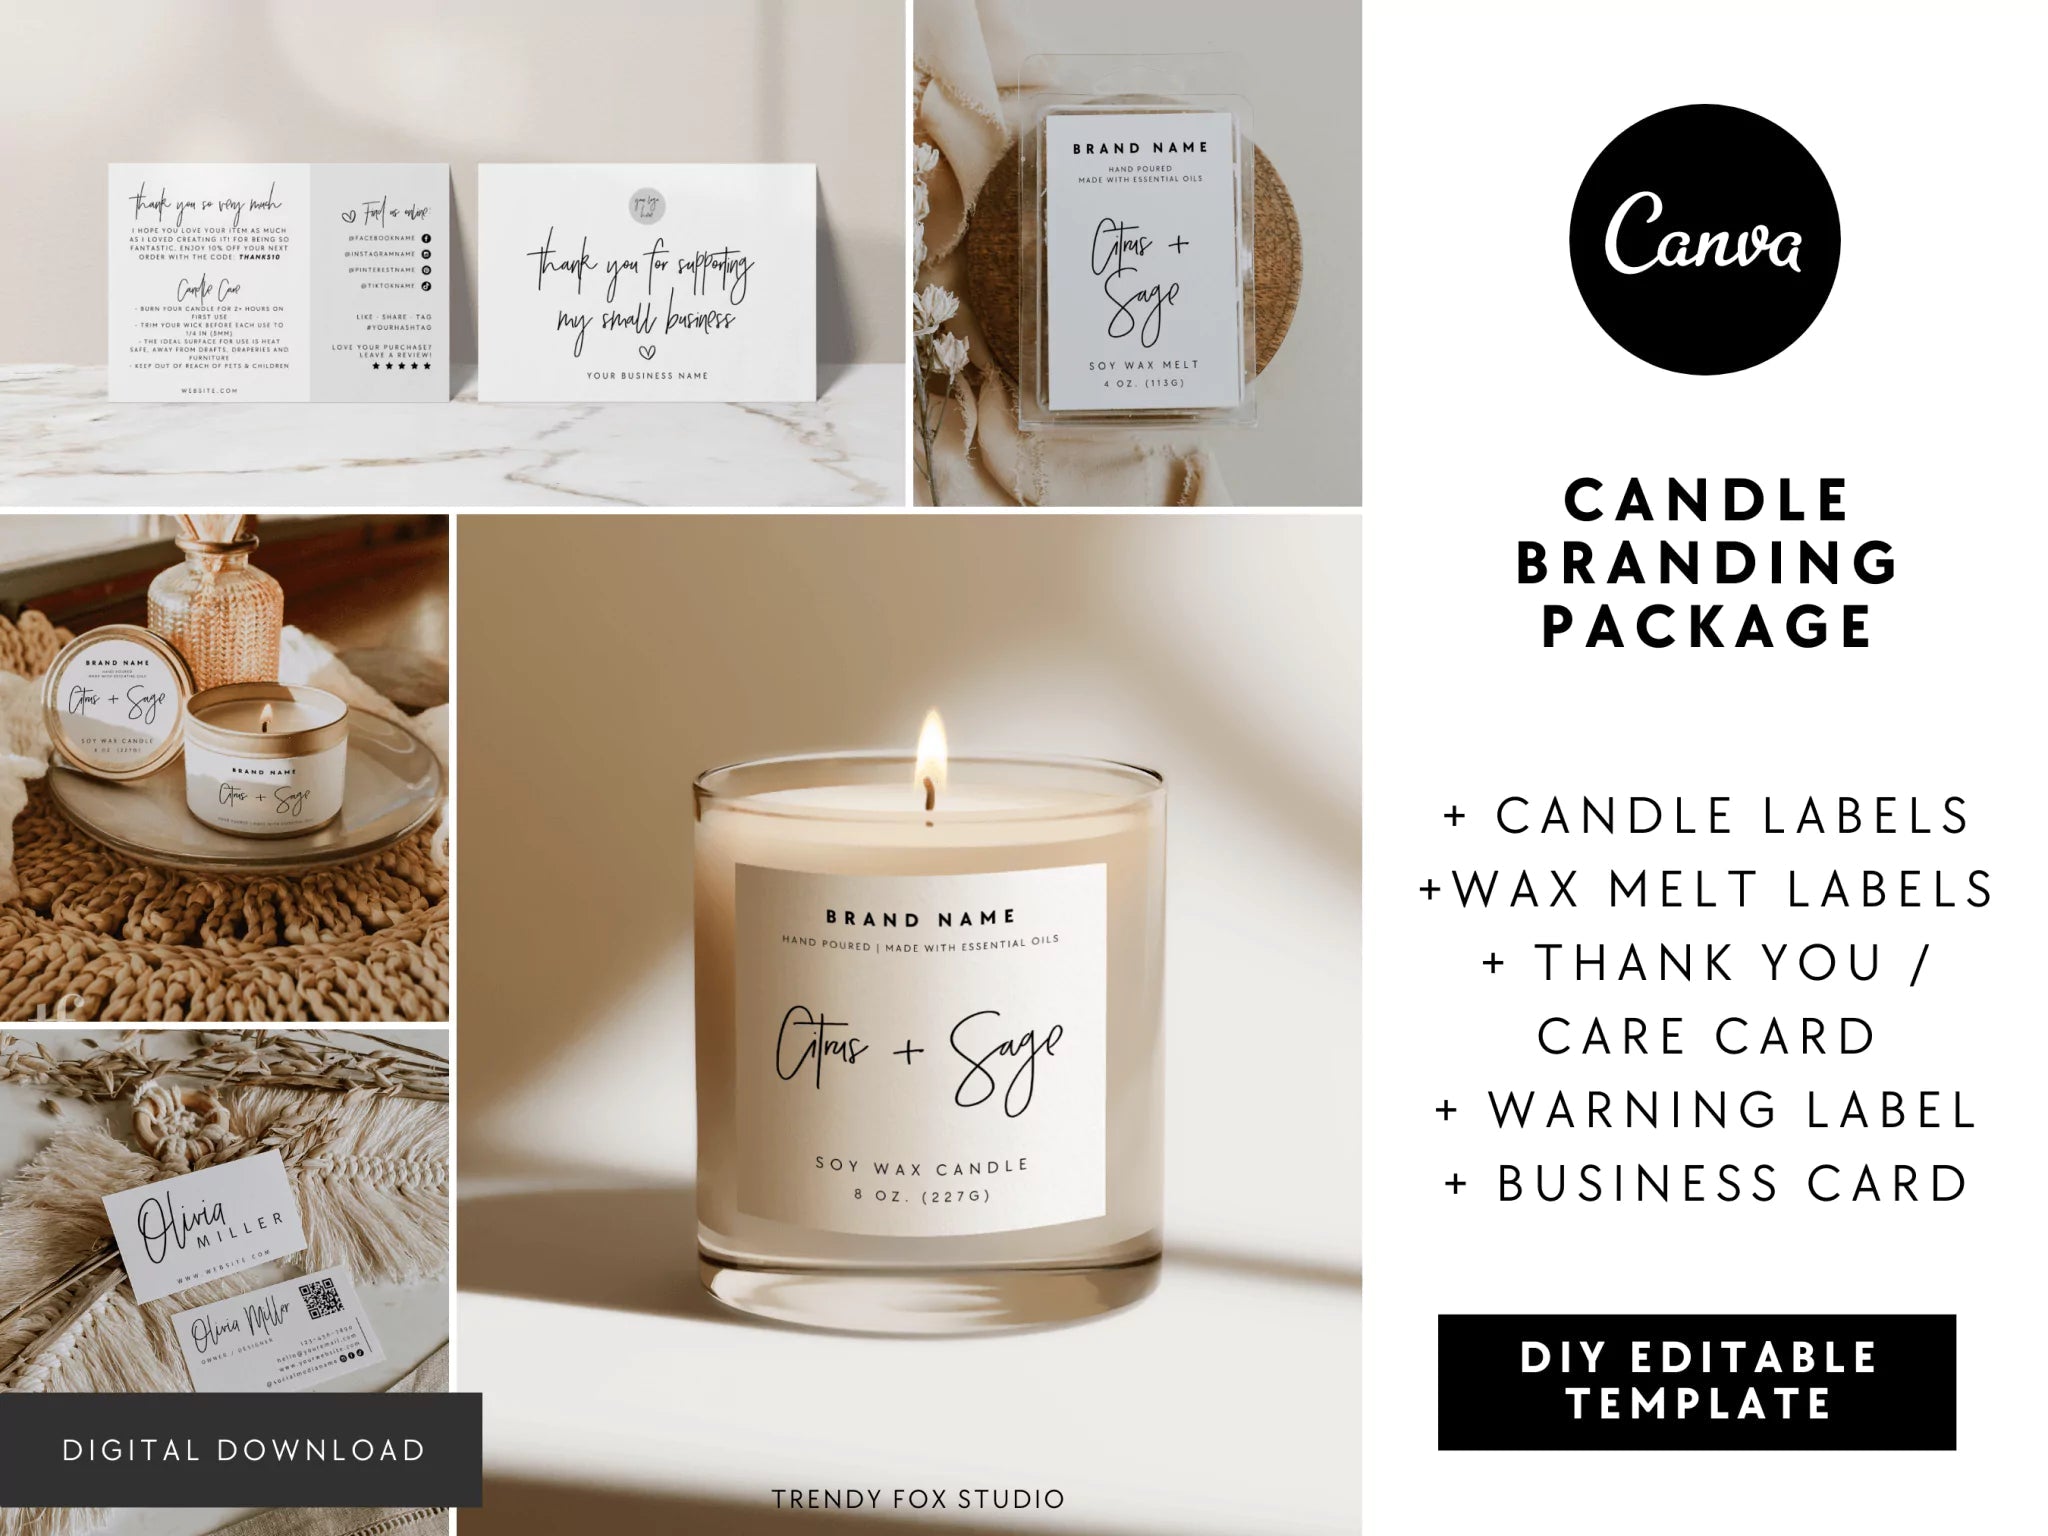 How to Apply Your Candle Labels Perfectly - Avery